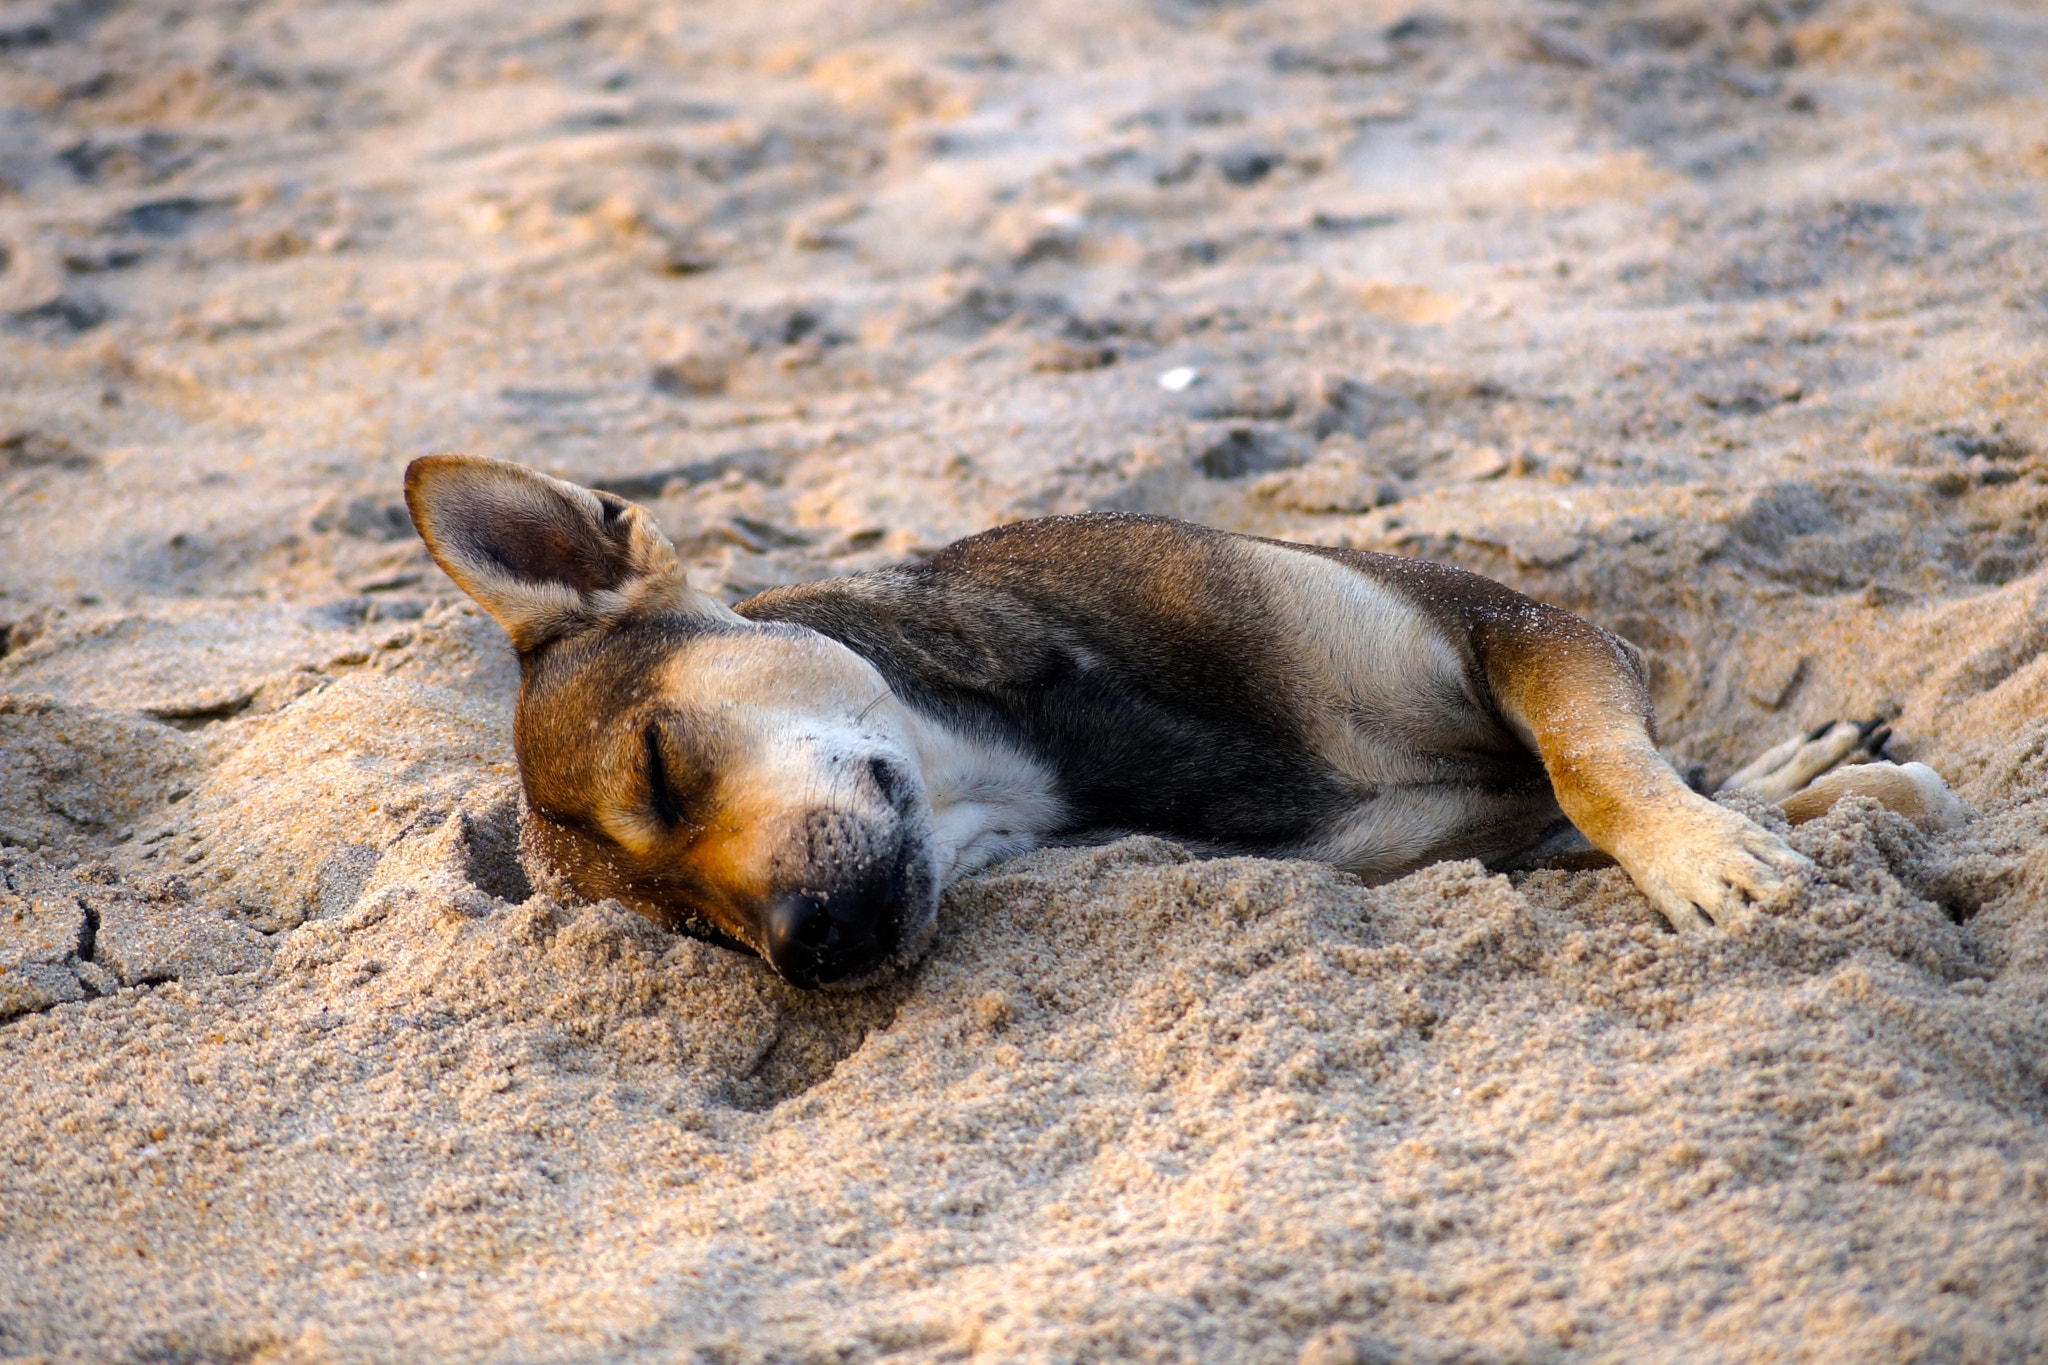 Sony a99 II + Sony DT 55-200mm F4-5.6 SAM sample photo. Nice sleeping dog in the sand on the sunset photography